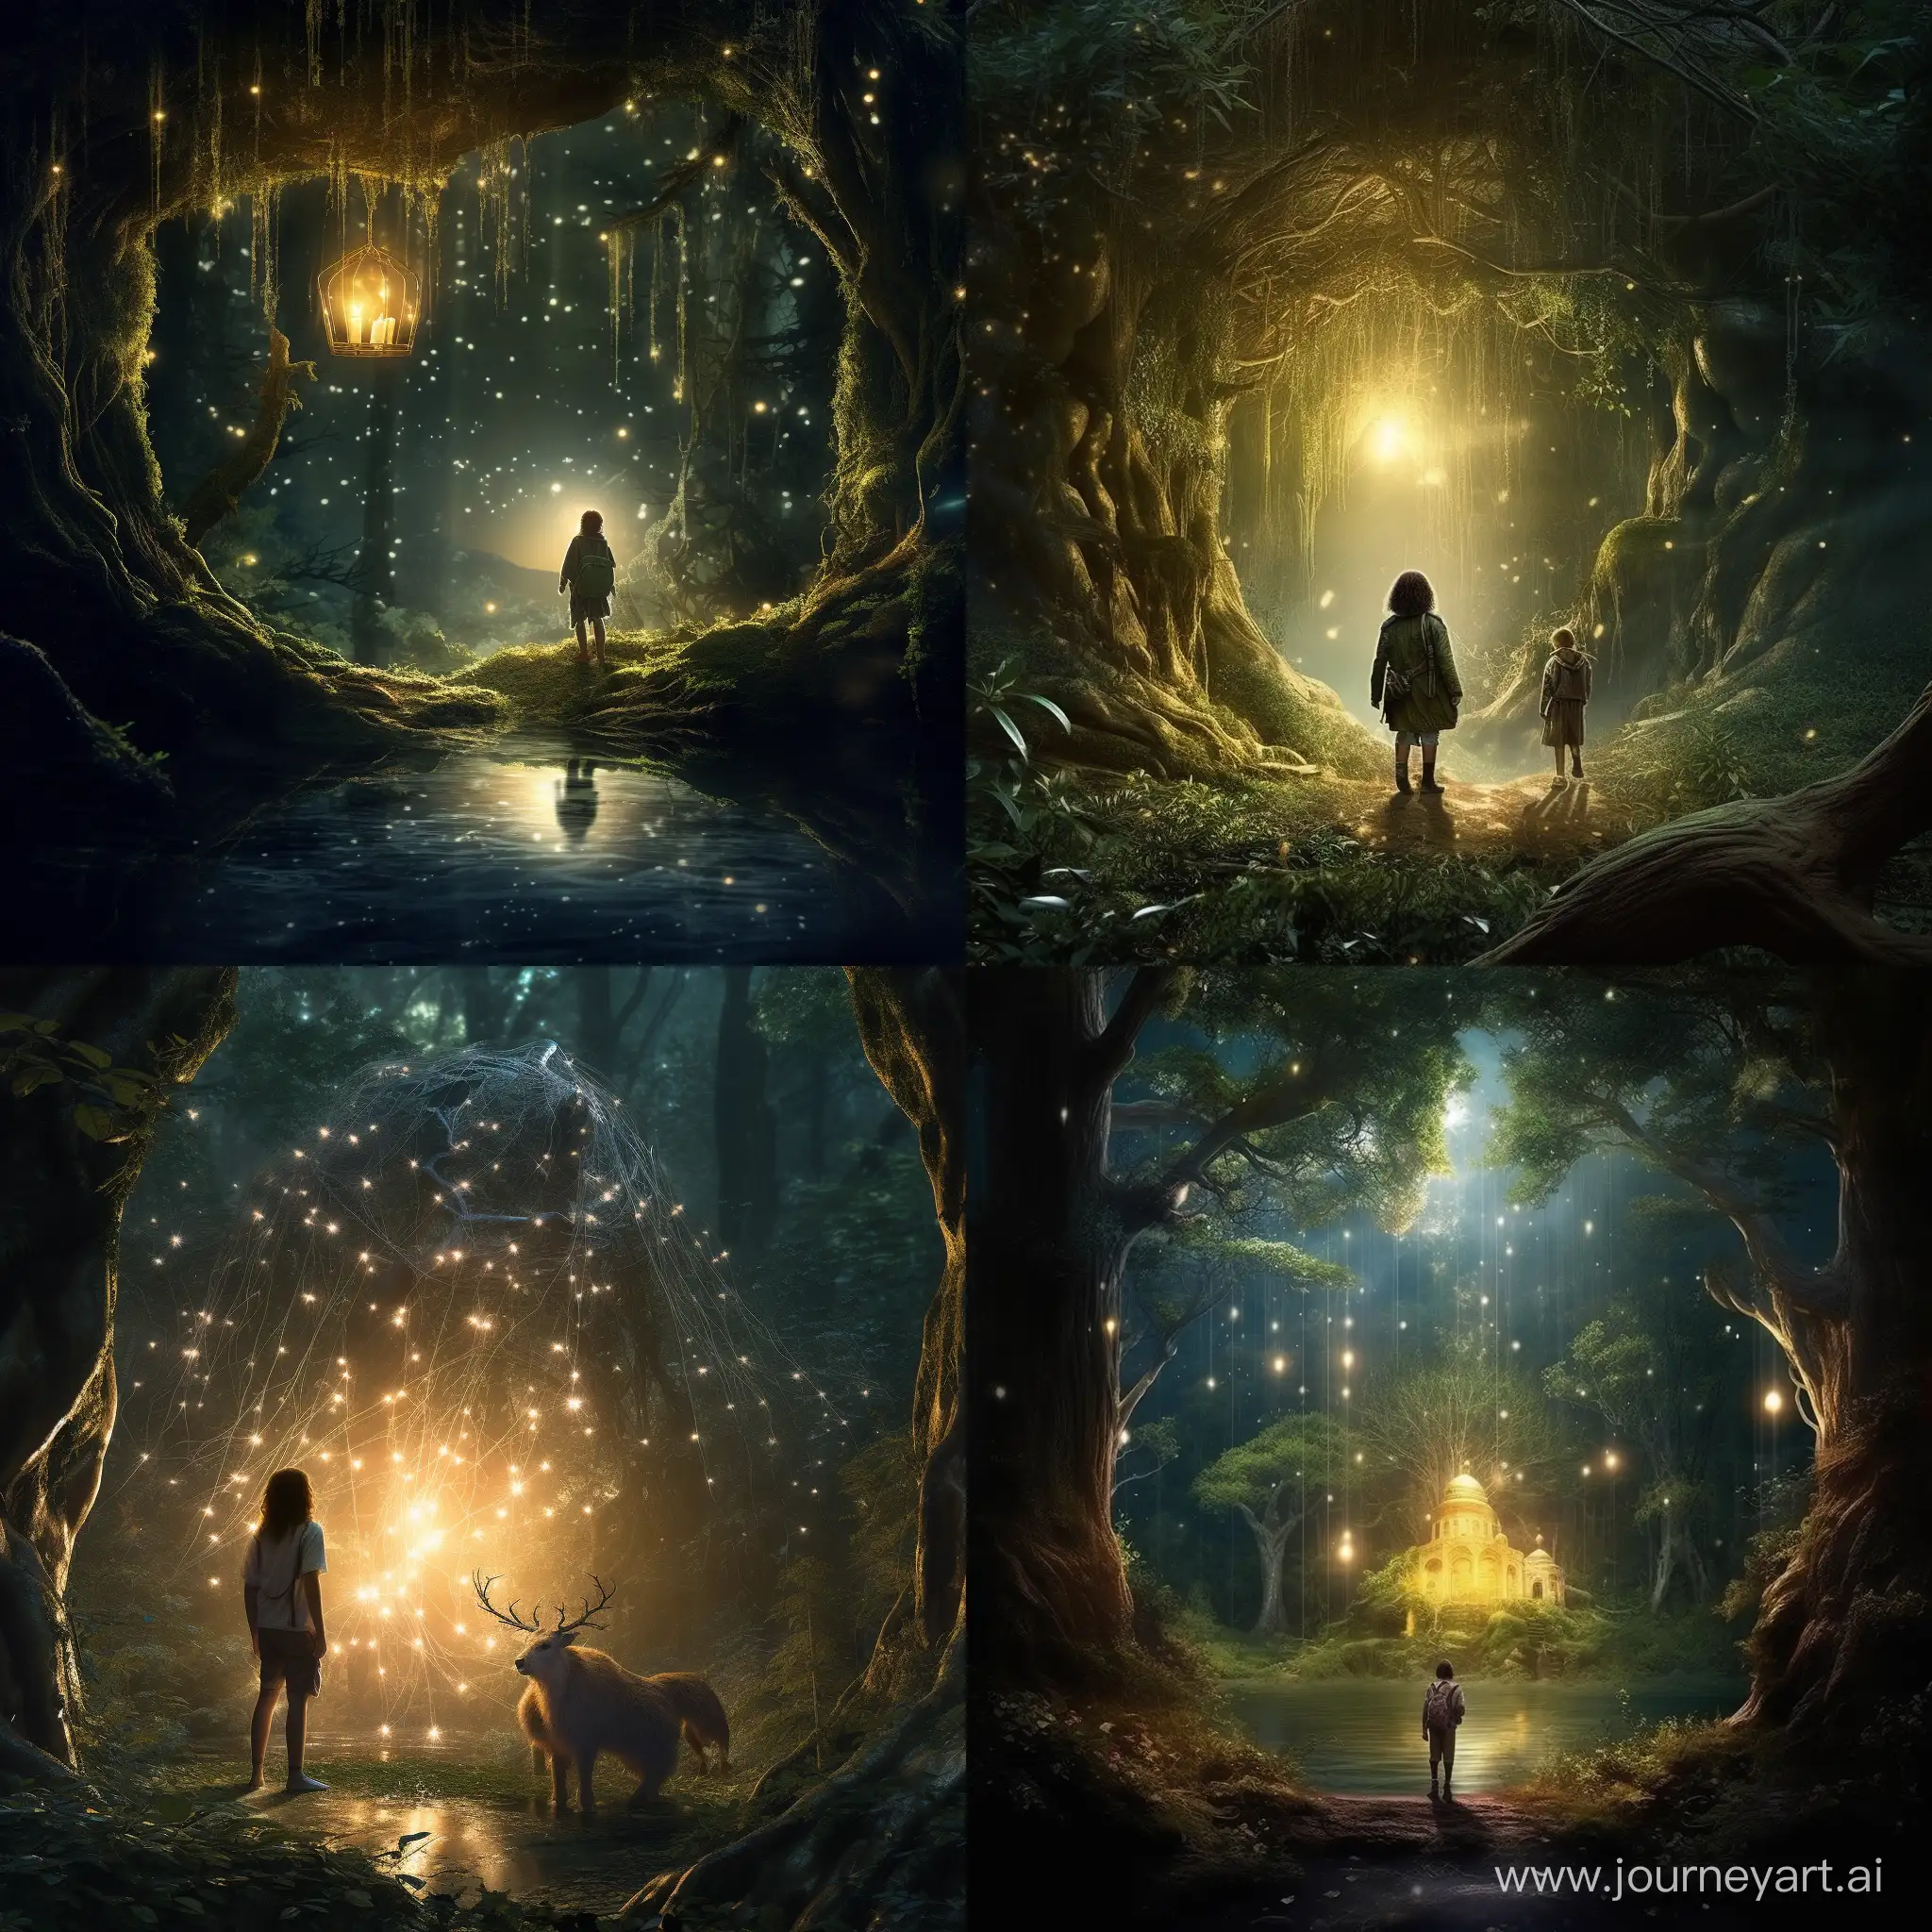 A mystical encounter between a traveler and a mythical creature in an enchanted forest. Deep within an ancient, otherworldly forest with towering trees and ethereal flora. Fantasy realm, no specific historical period. Magical, mysterious, with a touch of wonder and awe. A lone traveler with a lantern and a mythical creature with luminescent features. The traveler cautiously approaching the mythical creature, both acknowledging each other's presence. Utilize a balanced composition with the mythical creature as the focal point, framed by the surrounding enchanting elements. Deep, mystical greens and blues for the forest, contrasted with the warm glow of the traveler's lantern and the creature's ethereal luminescence. Soft, diffused moonlight filtering through the forest canopy, emphasizing the magical ambiance. Blend of realism and fantasy elements to create a visually captivating and immersive scene. Pay attention to the subtle details of the mythical creature's features. Create an otherworldly atmosphere with gentle, atmospheric effects like mist or glowing particles.
